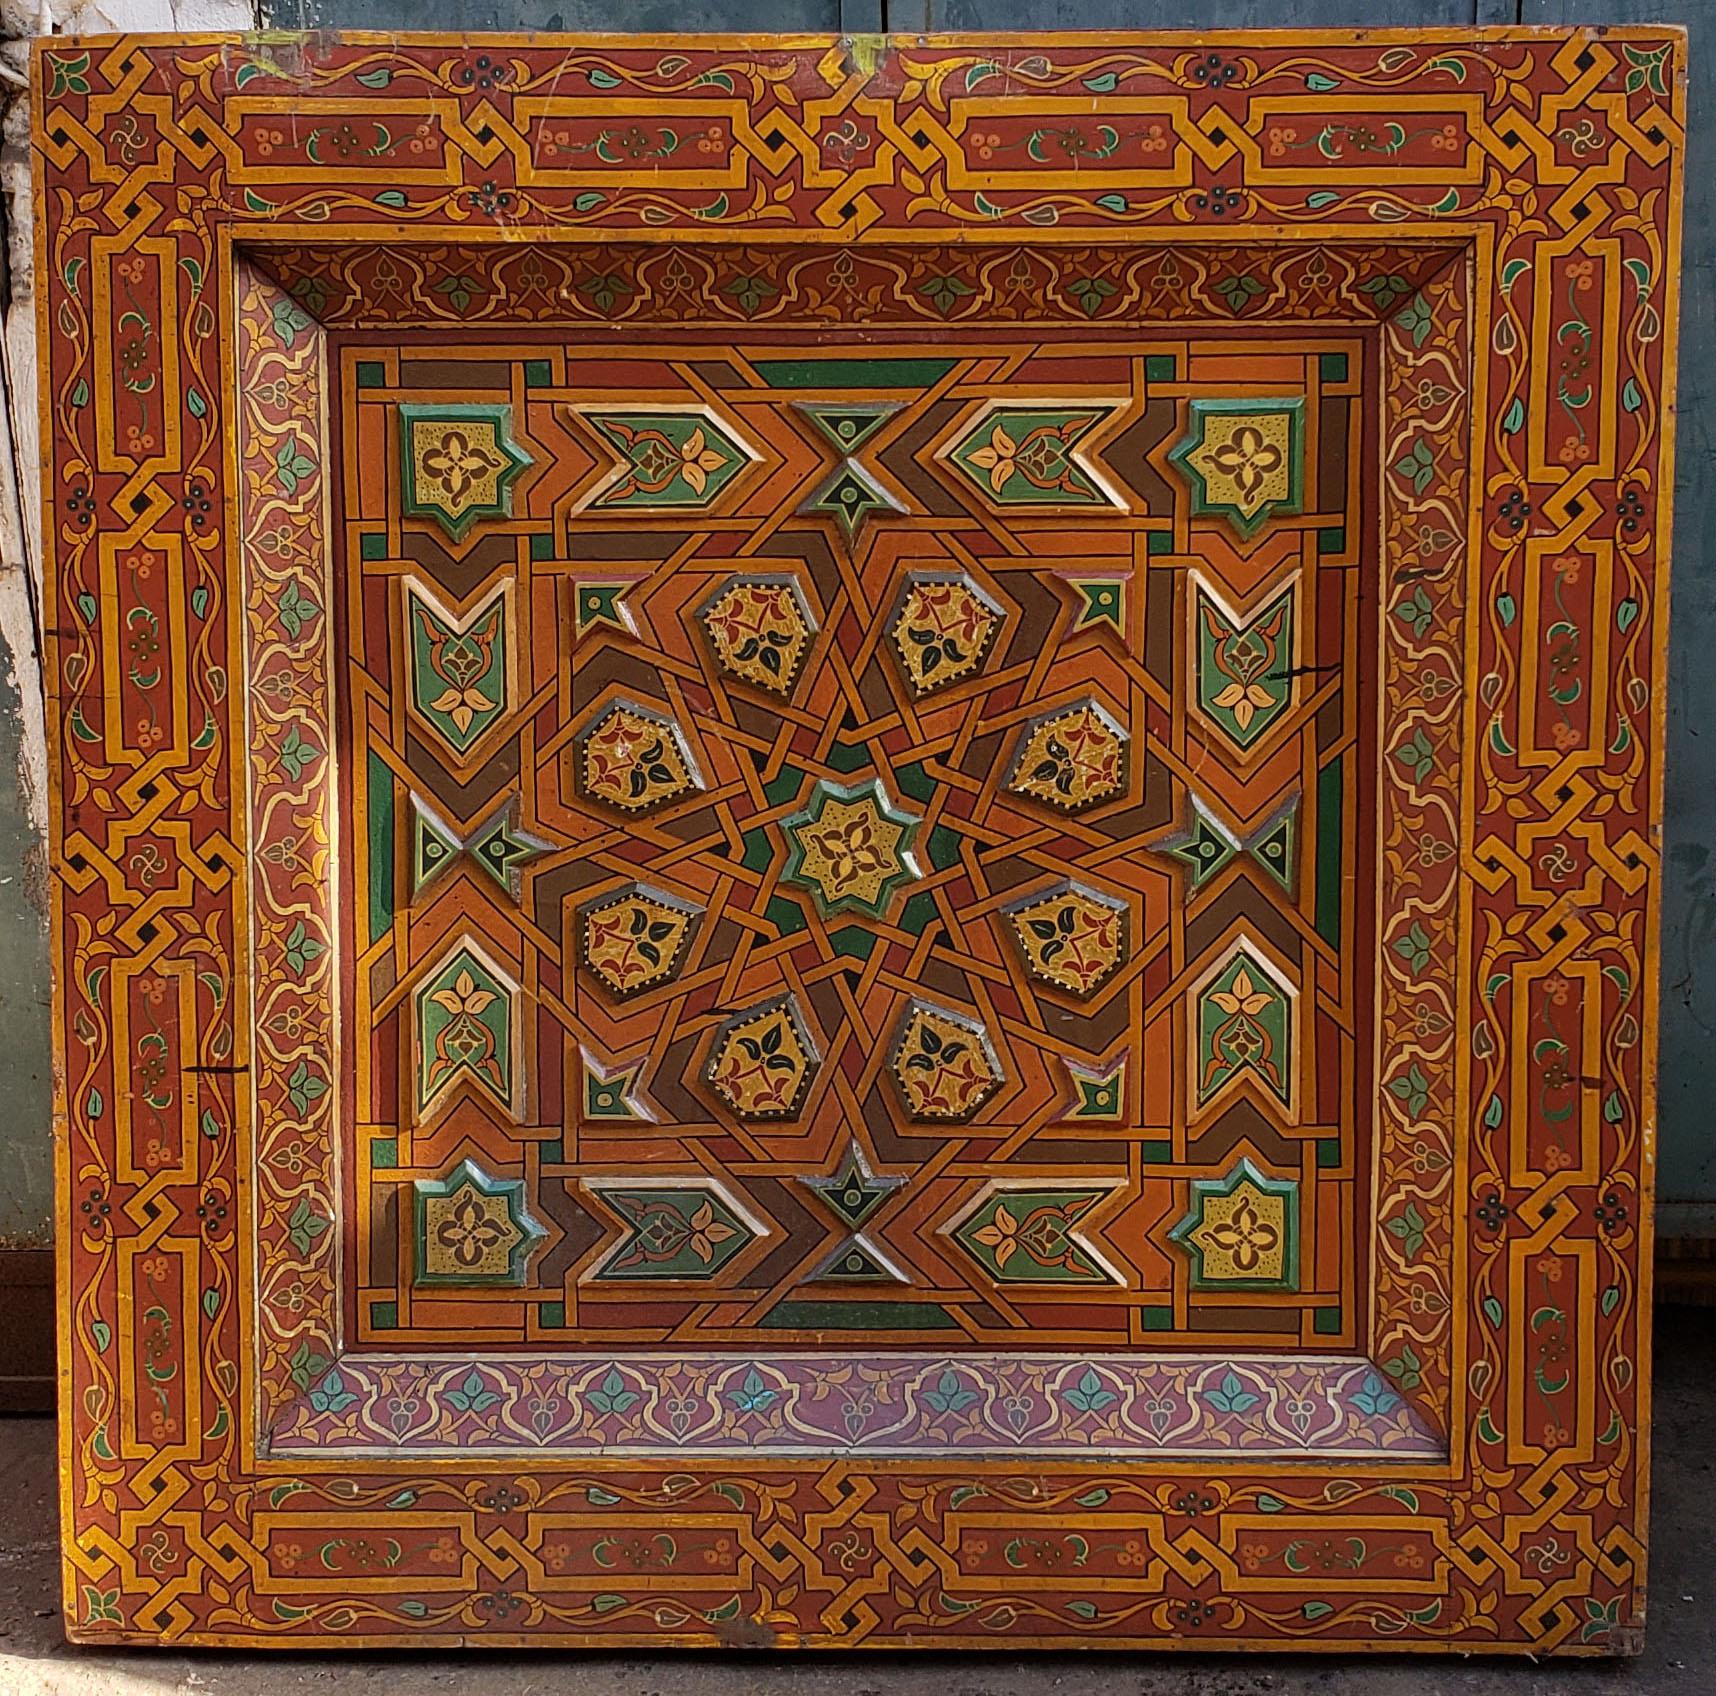 Can be used both as a ceiling piece or a wall hanging.
Handmade Moroccan cedar wooden frame measuring approximately 48” in height, 48” in width, and 3” in depth. Hand painted and hand carved by master artisans in Fez. Lots of details and amazing